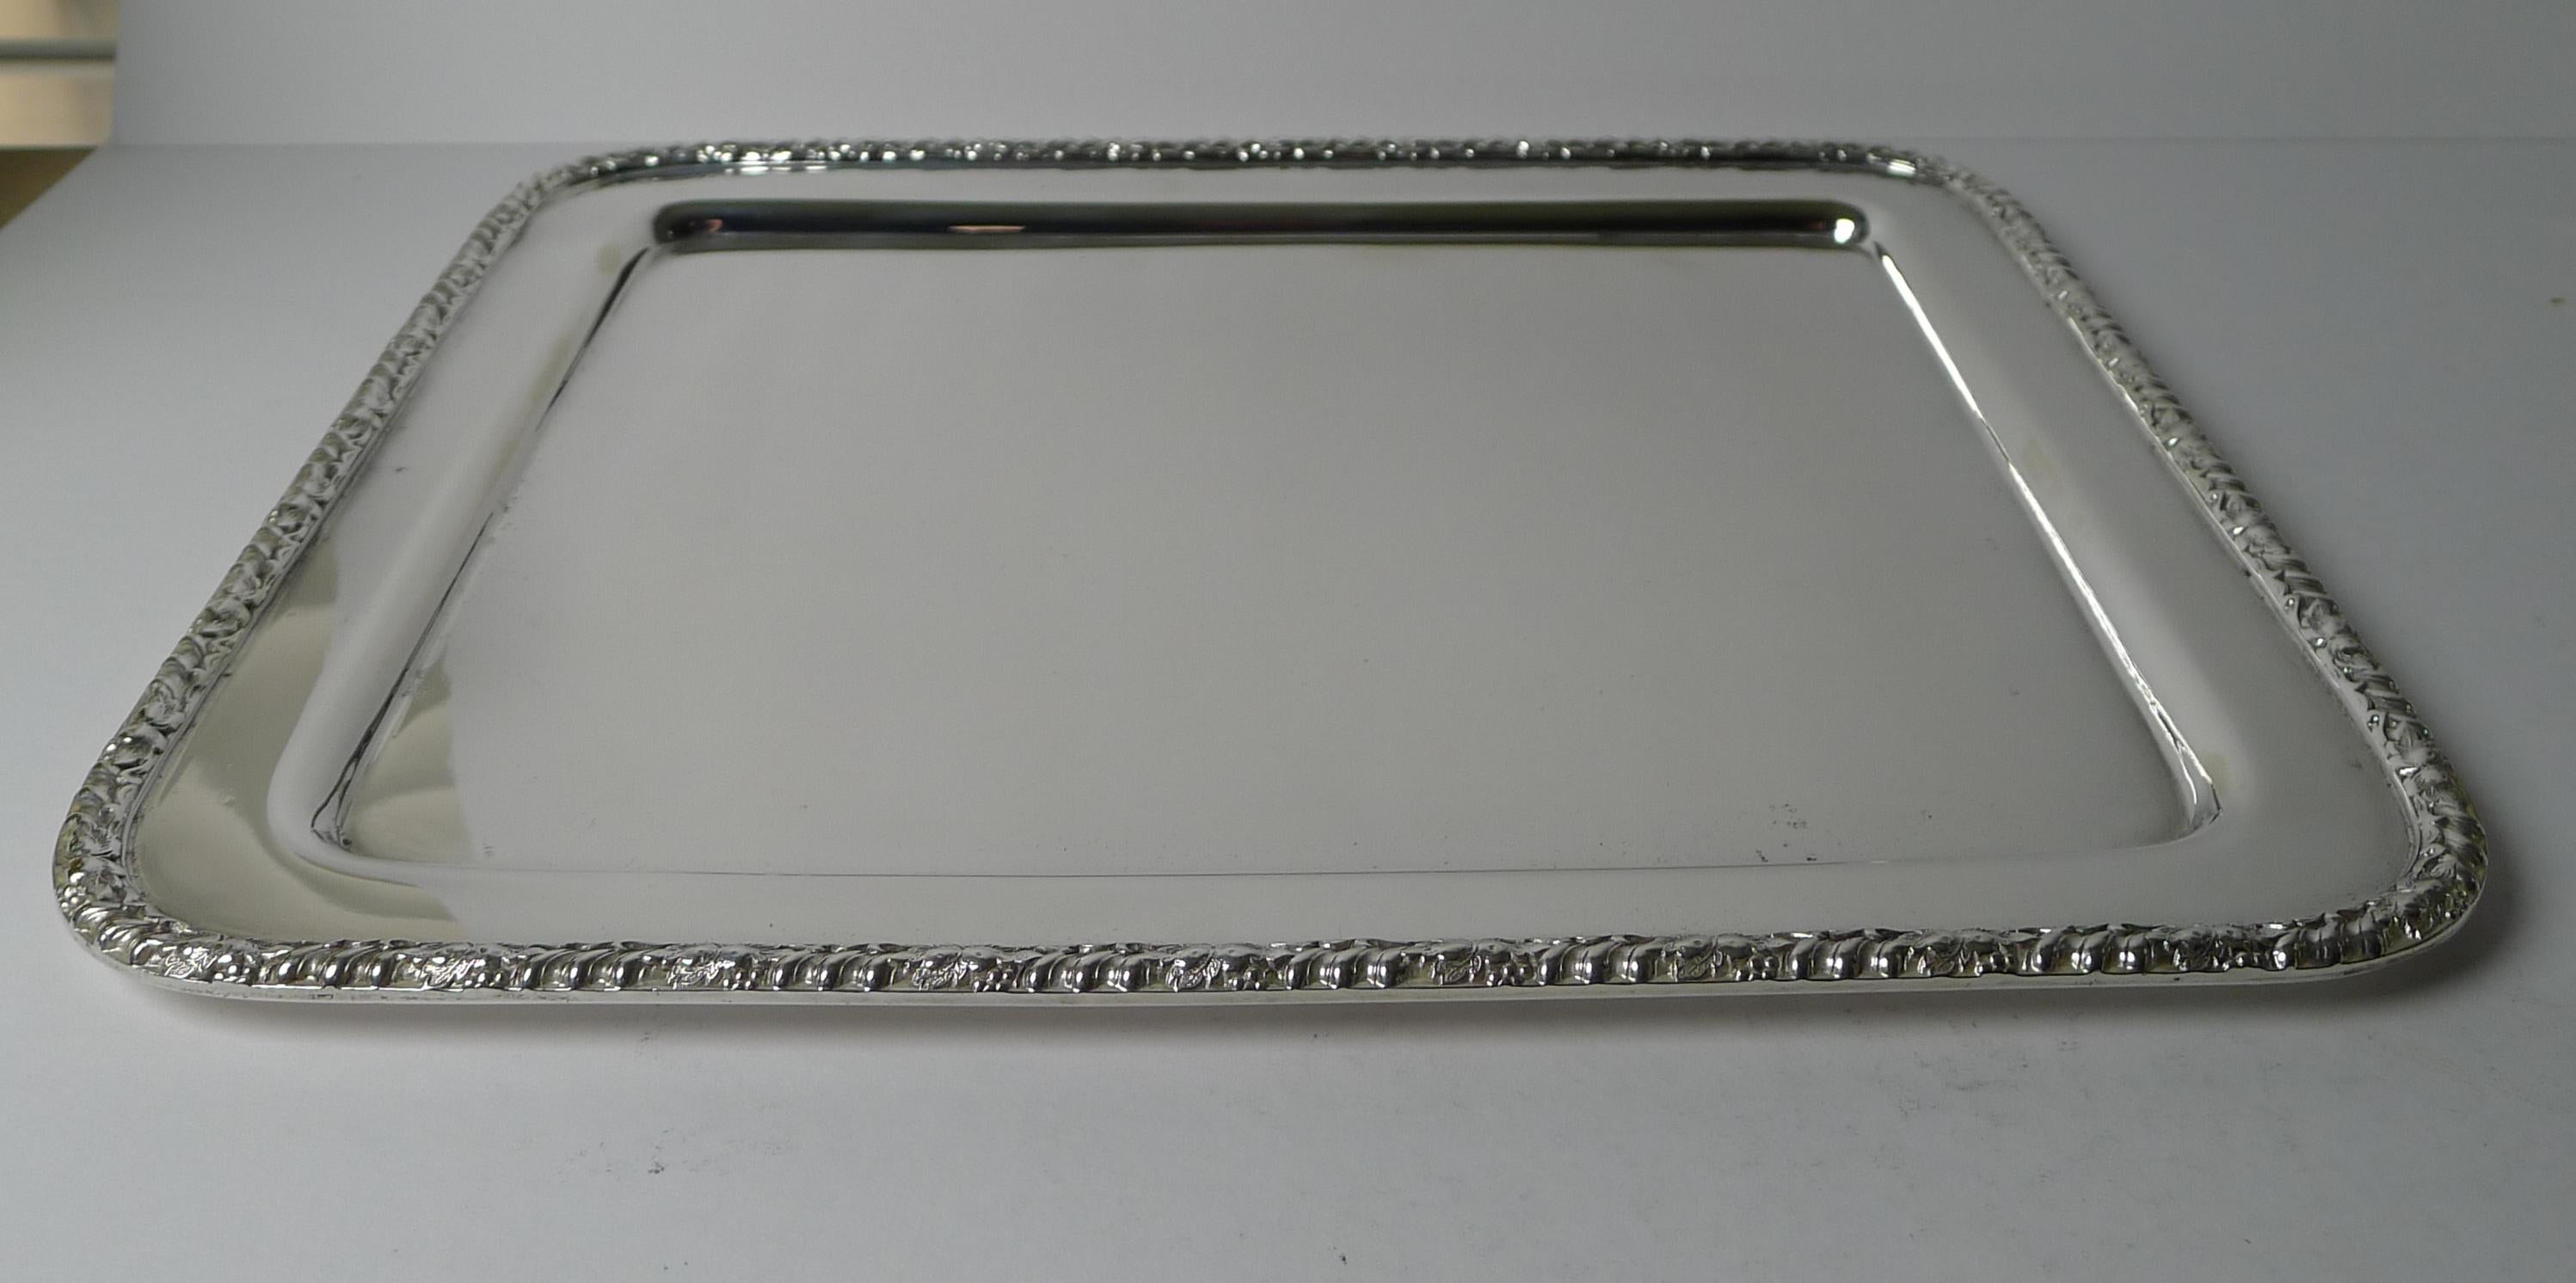 British Elegant English Silver Plated Cocktail Tray by Barker Brothers c.1900